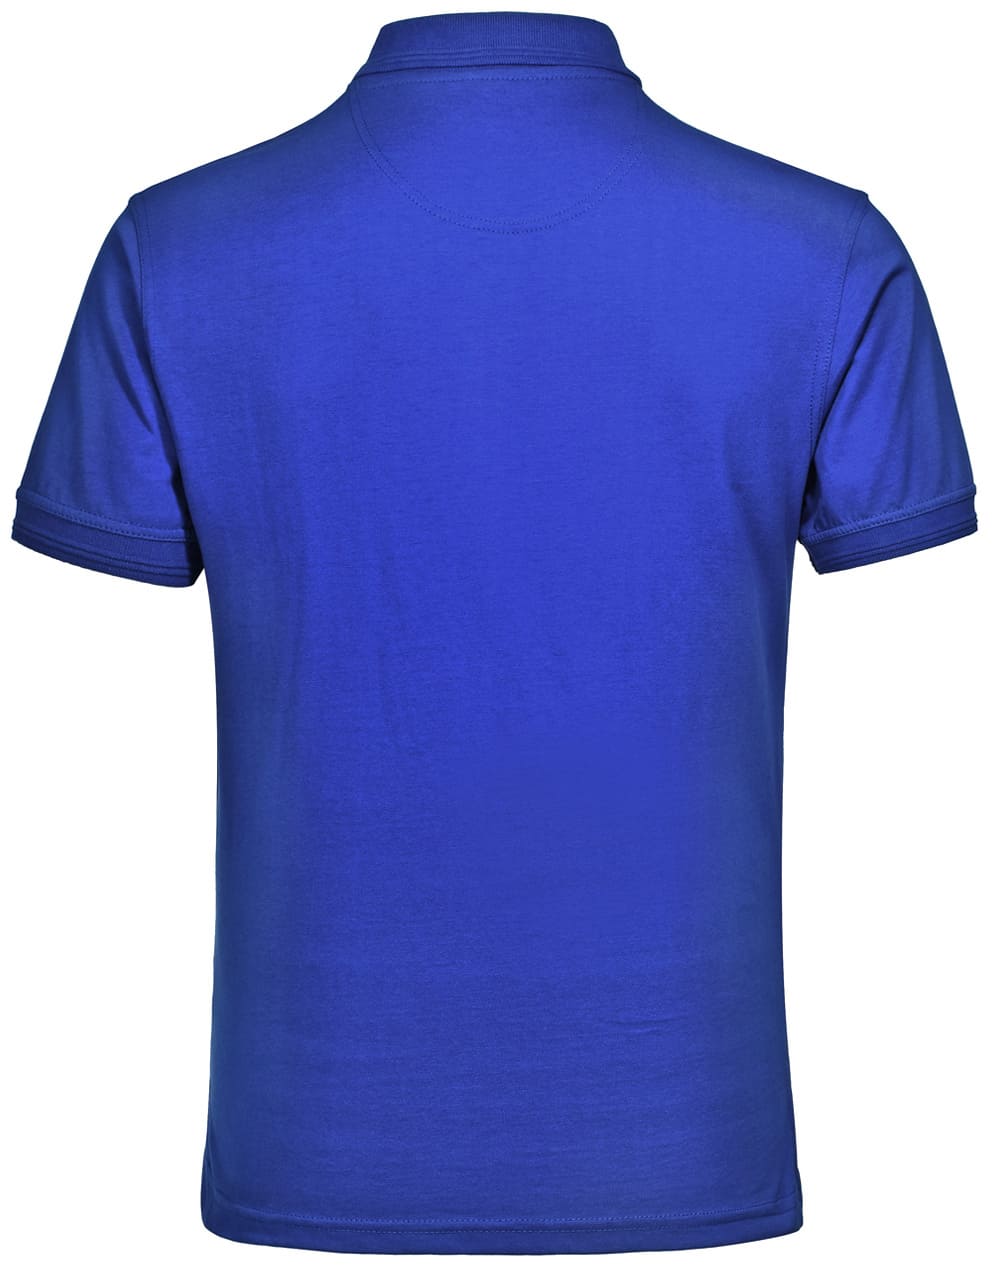 Custom (Royal) Macquarie Unisex Contrast Cotton Kit Polos backside Online in Perth